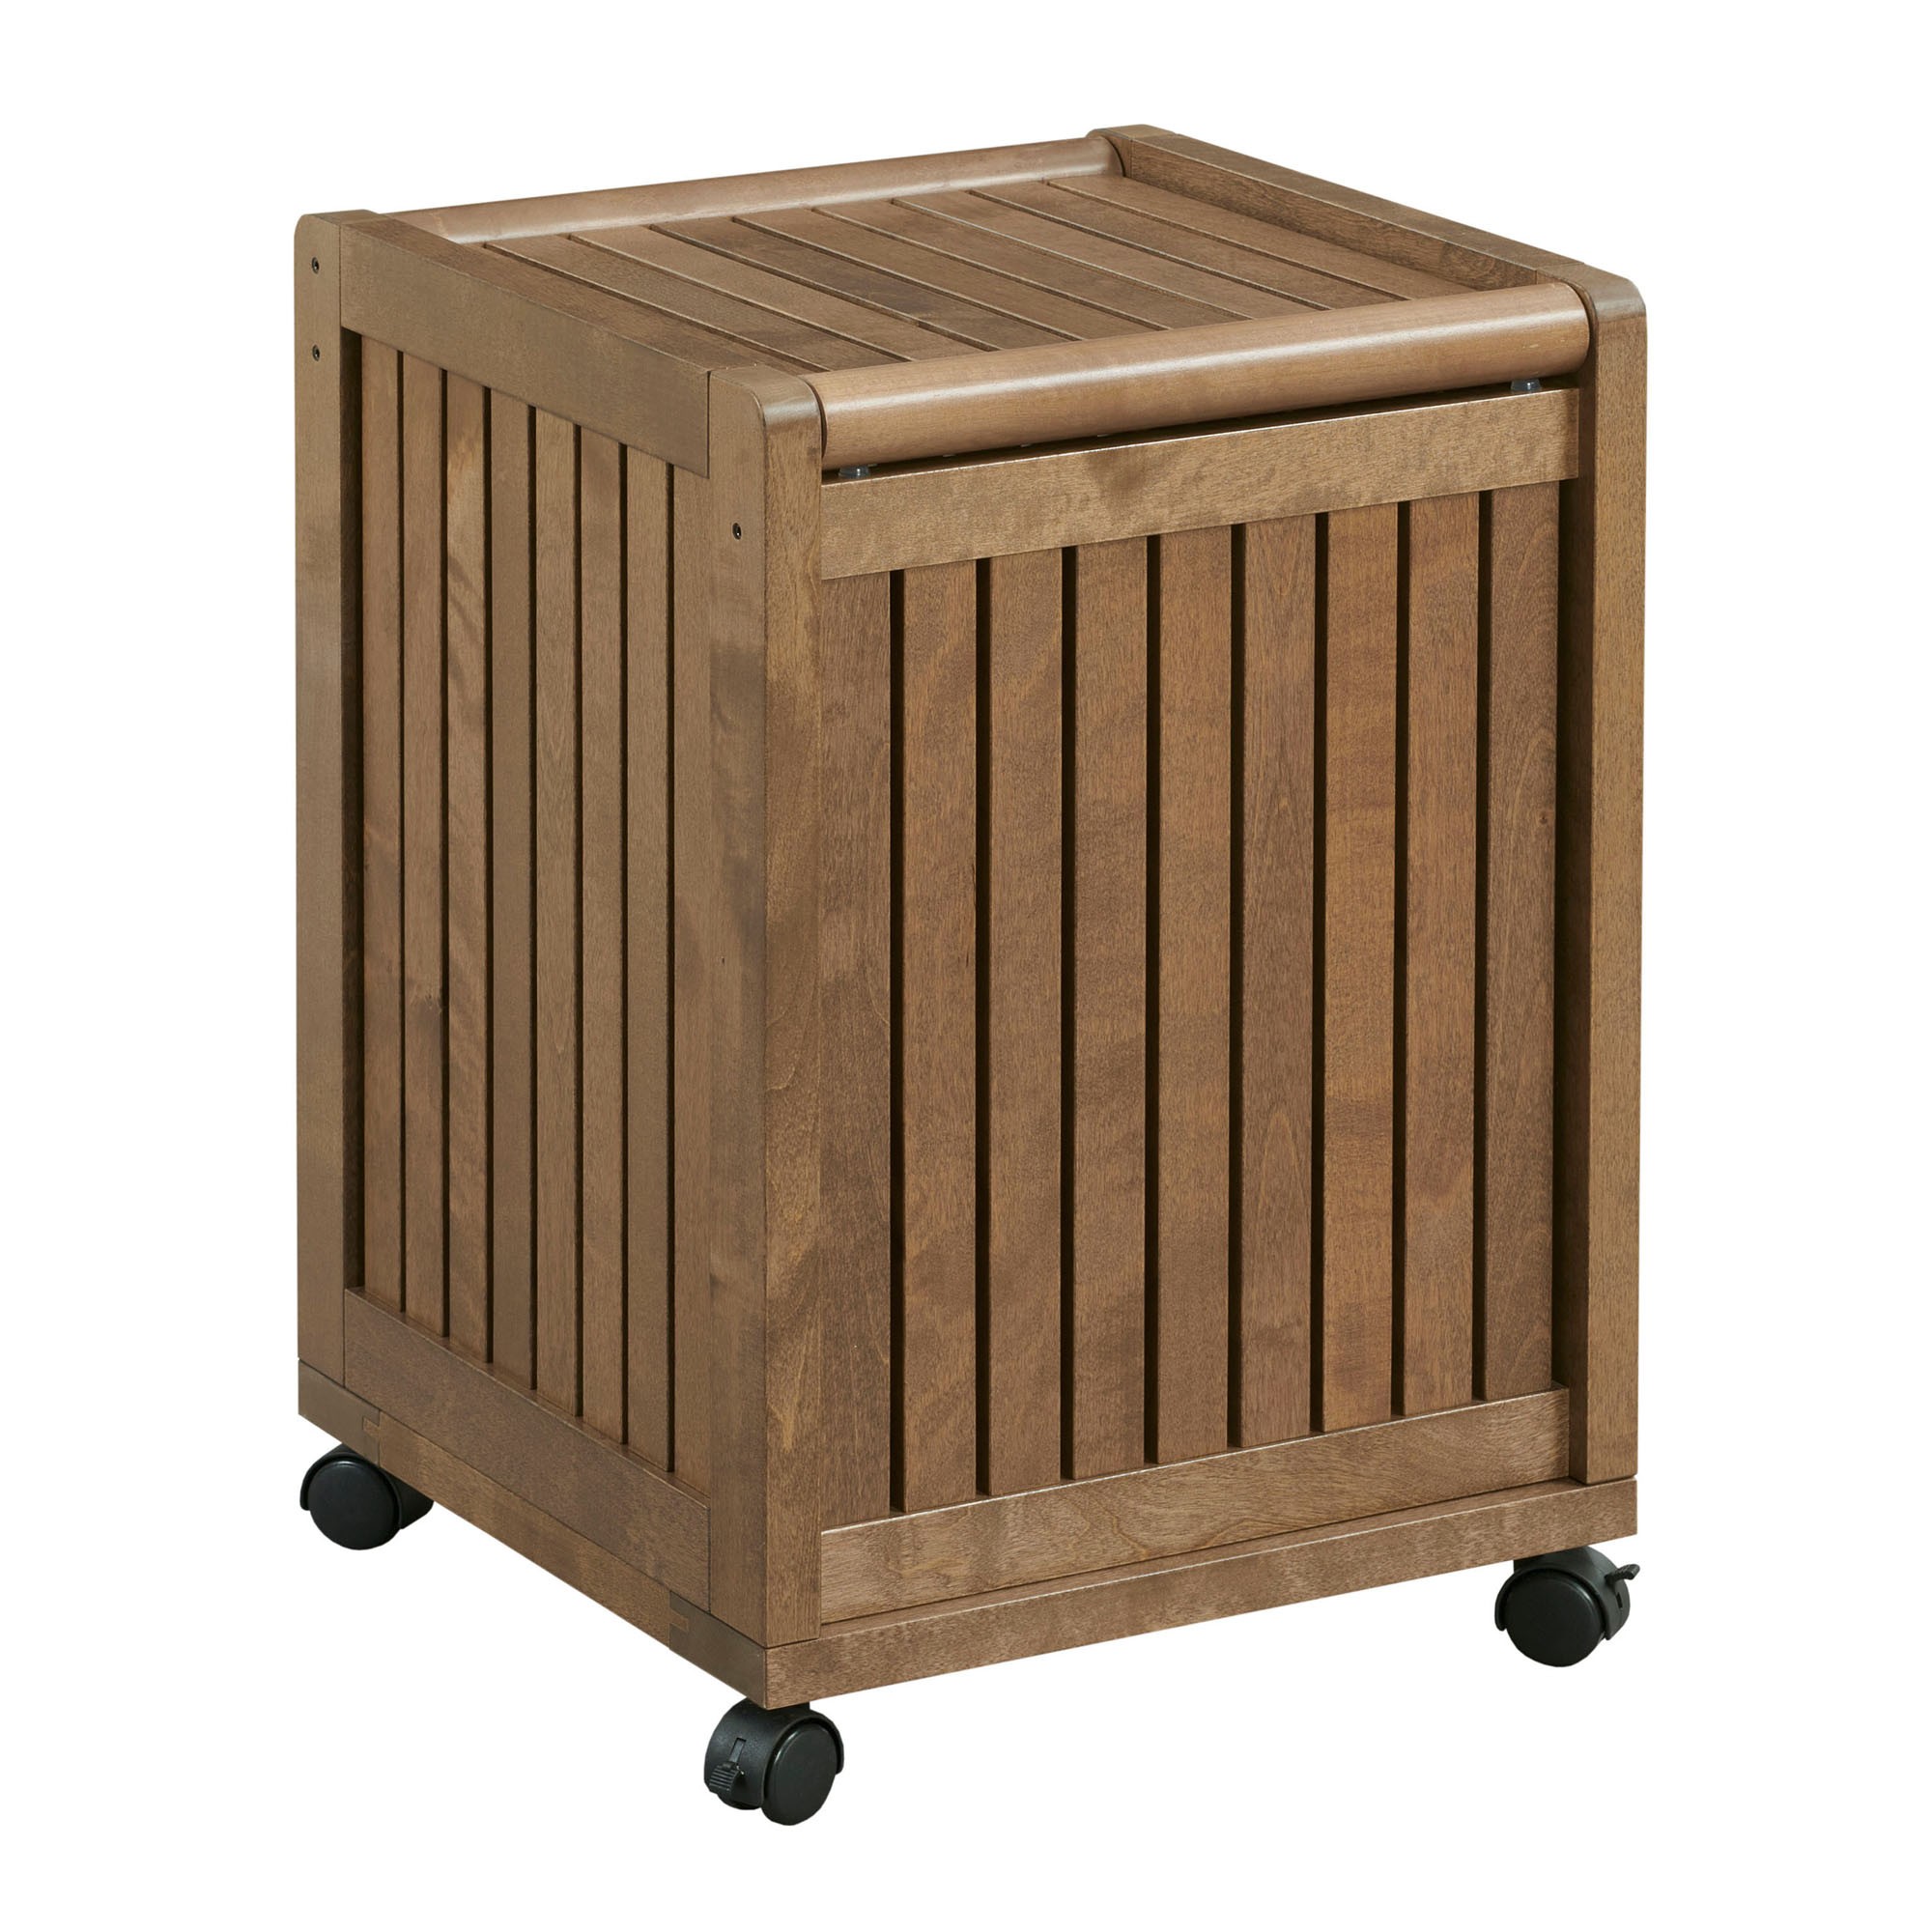 Chestnut Solid Wood Rolling Laundry Hamper with Lid